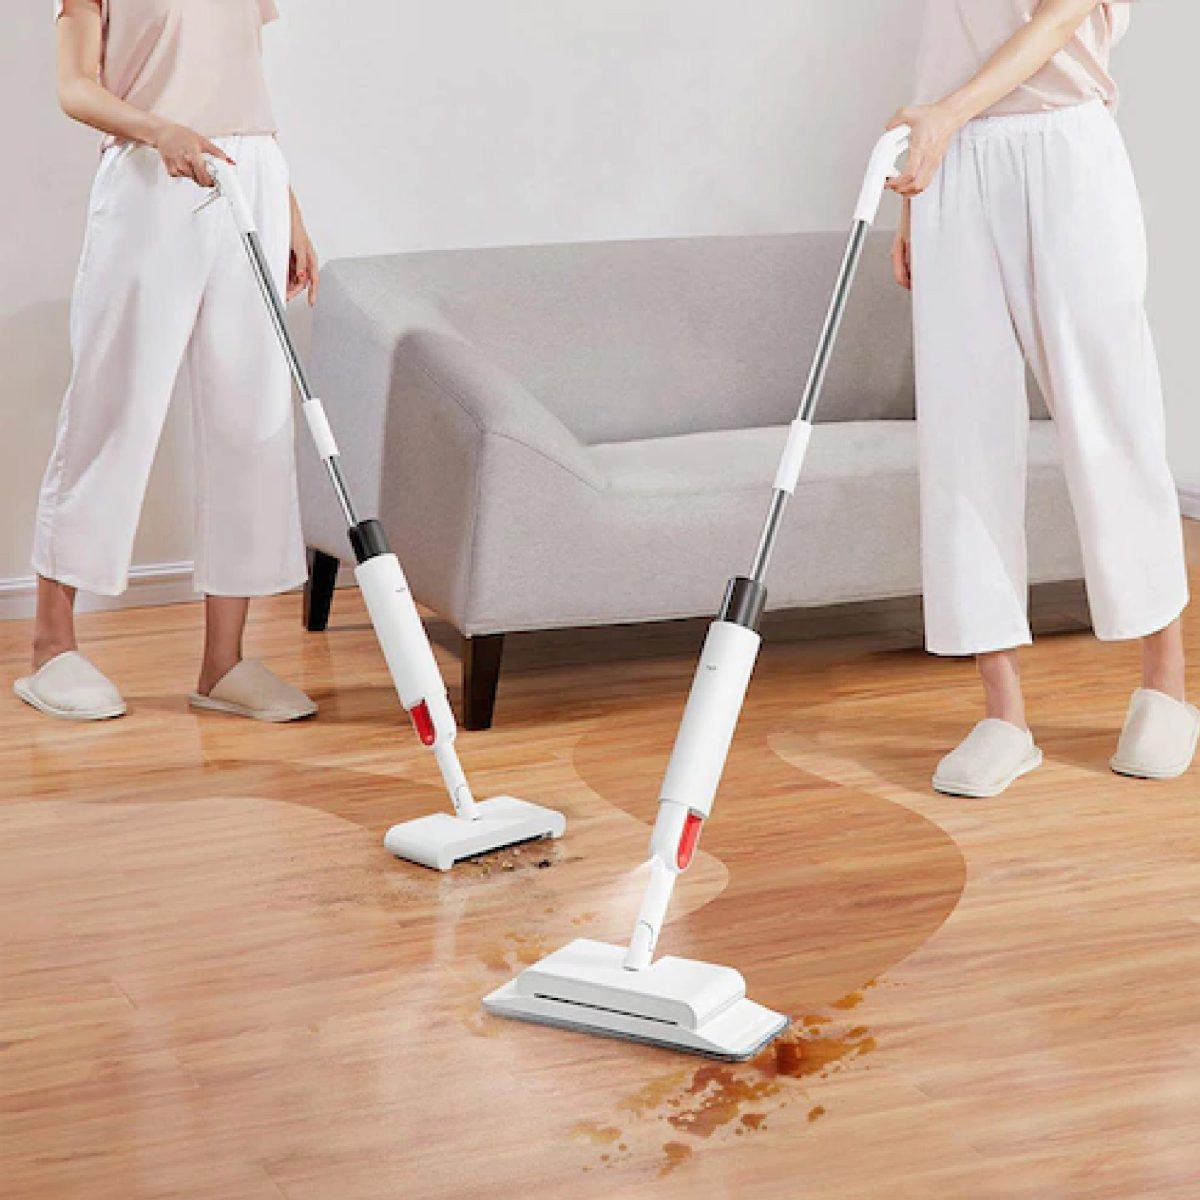 Delmar 04 Xiaomi &Lt;H1&Gt;Deerma Dem-Tb900 Sweep Mop With Sweeping / Cleaning Function&Lt;/H1&Gt; Easy To Operate, Easy To Push, Long-Distance Spray Can Make The Ground Slightly Damp, High Cleaning Efficiency. Front Roller Brush Spiral Machine, I.e. Pushed Forward Rotation Can Drive The Roller Brush, The Floor Dust Rubbish Swept Into The Dust Box, Dust And No Sweep Net. Soft Bristles Slender, Deep Ground Slit Sweep Out Dust, Clean The Inside And Outside. Deerma Deerma Dem-Tb900 Sweep Mop With Sweeping / Cleaning Function